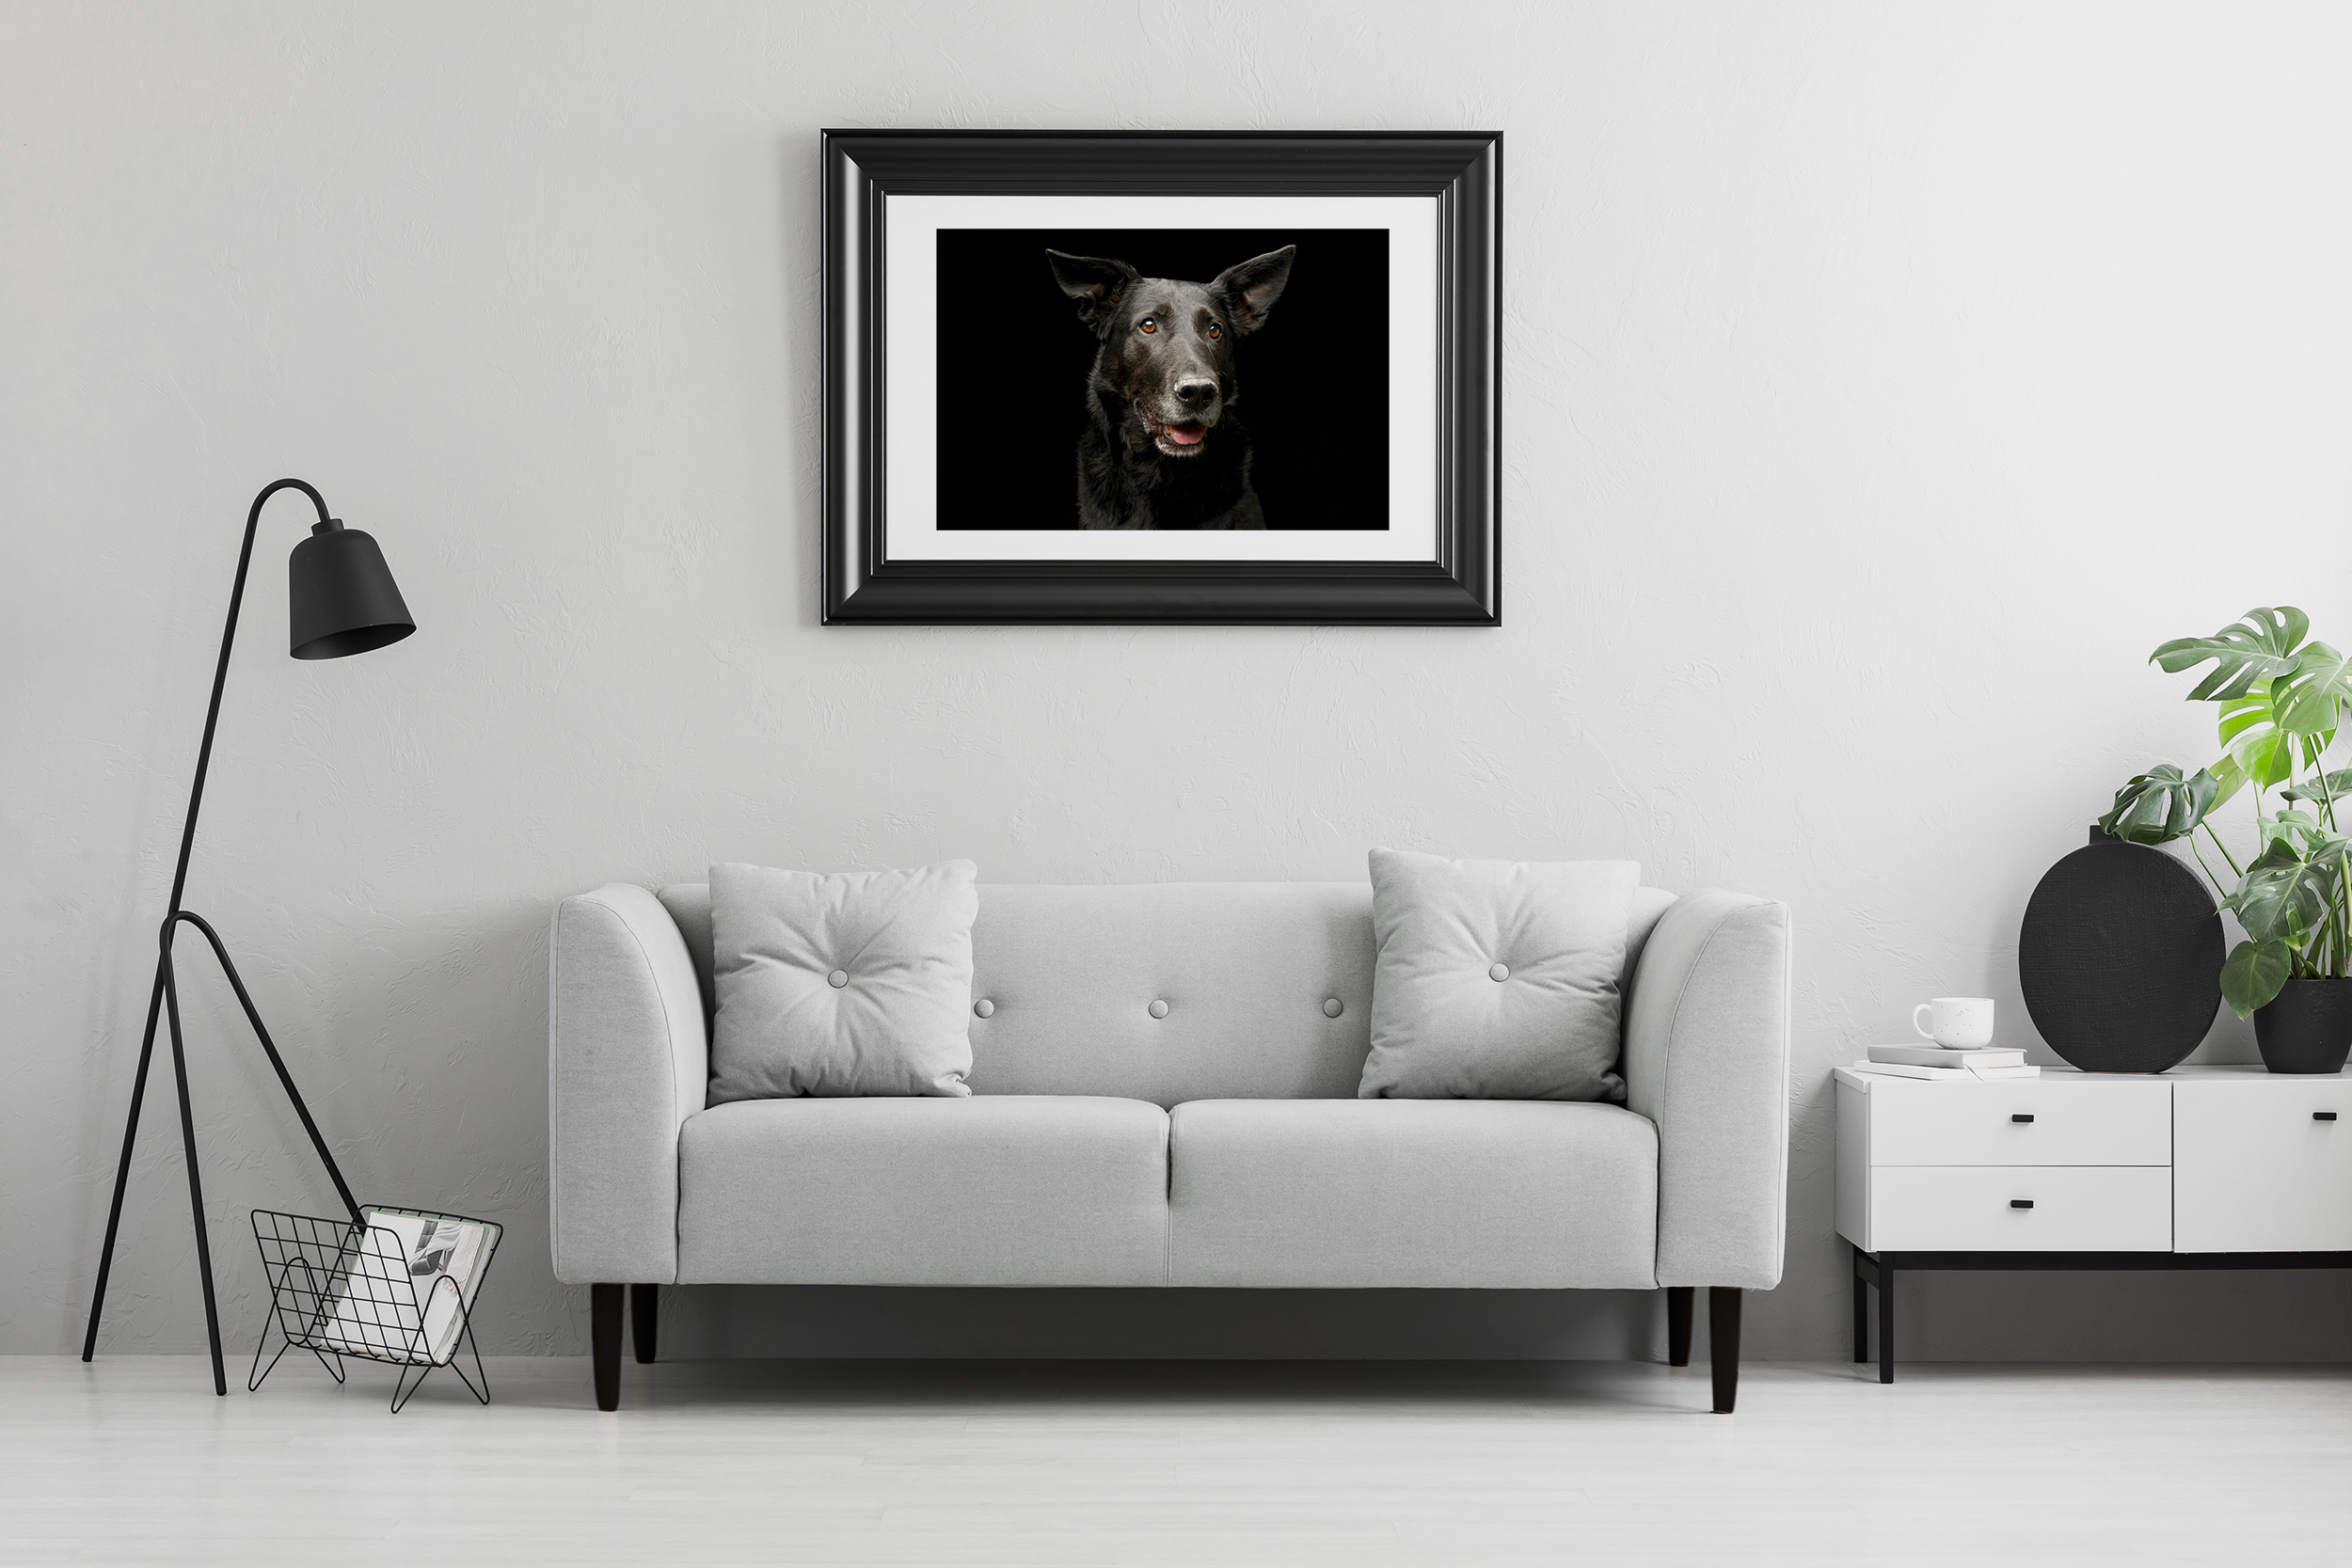 Framed photo on a wall above a fancy, gray sofa with cushions in a minimalist living room interior and place for a table. Real photo.